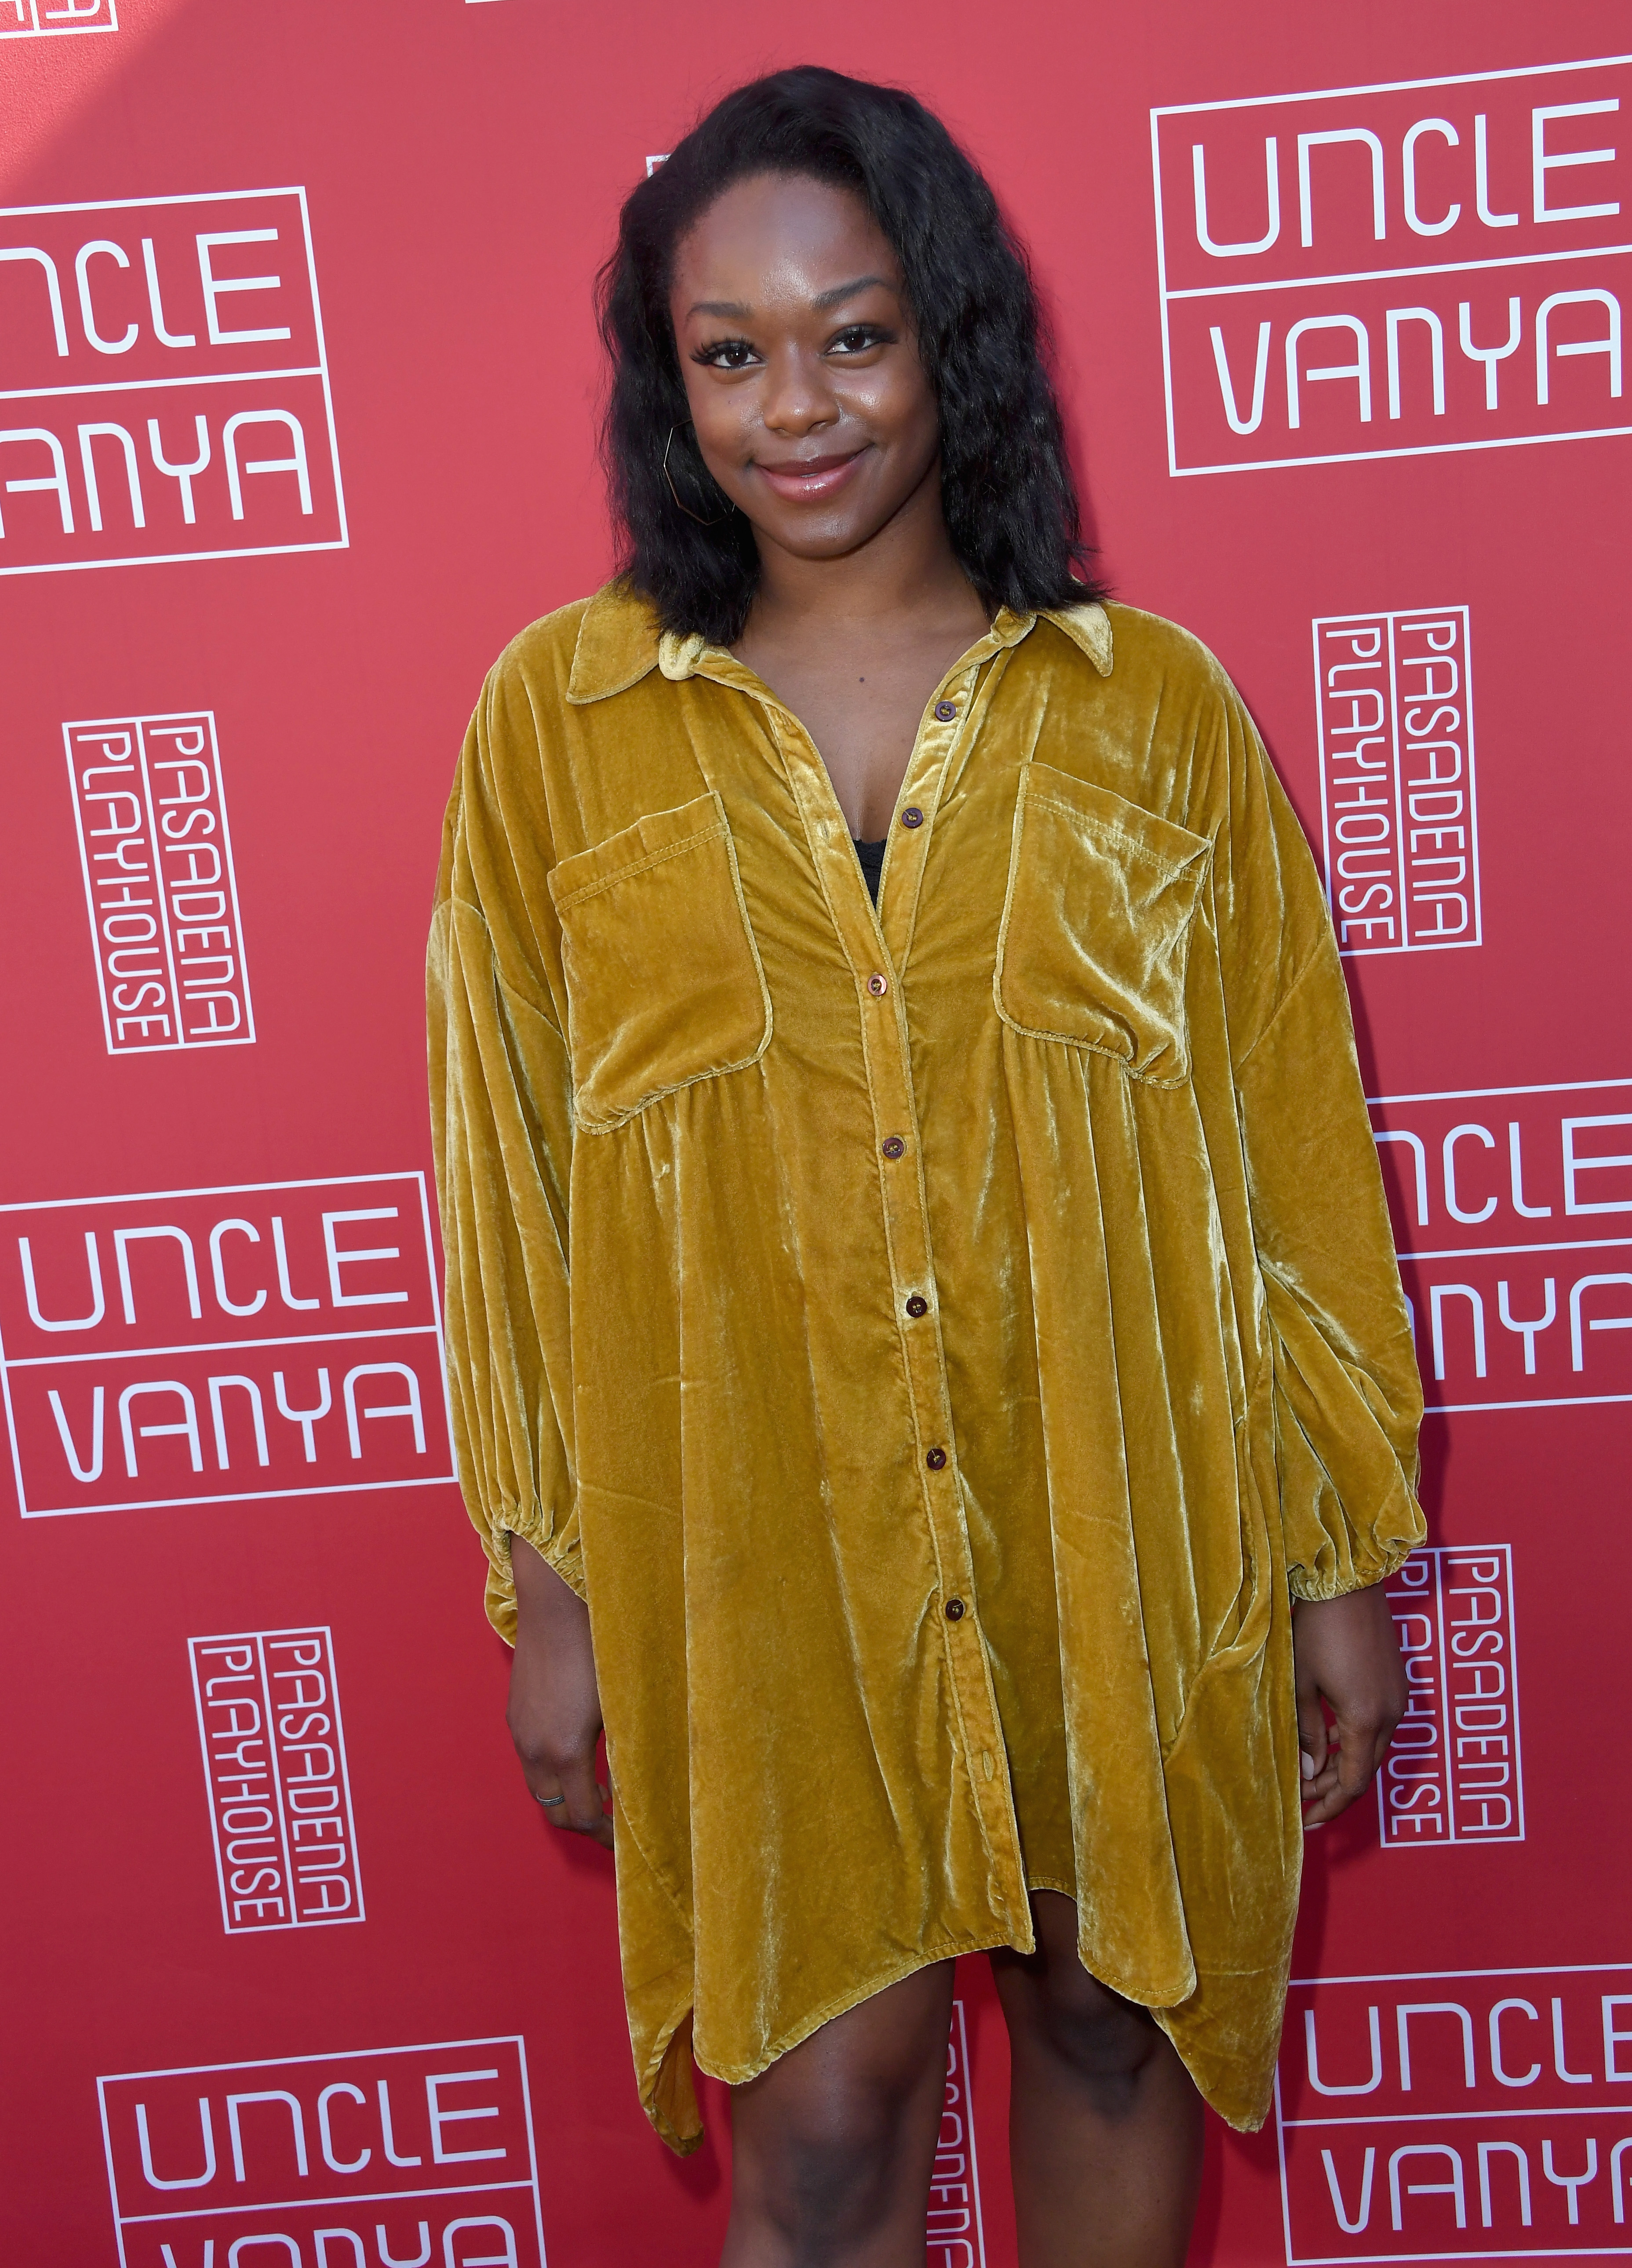 Jazz Raycole at the opening night of "Uncle Vanya" on June 5, 2022, in Pasadena, California. | Source: Getty Images